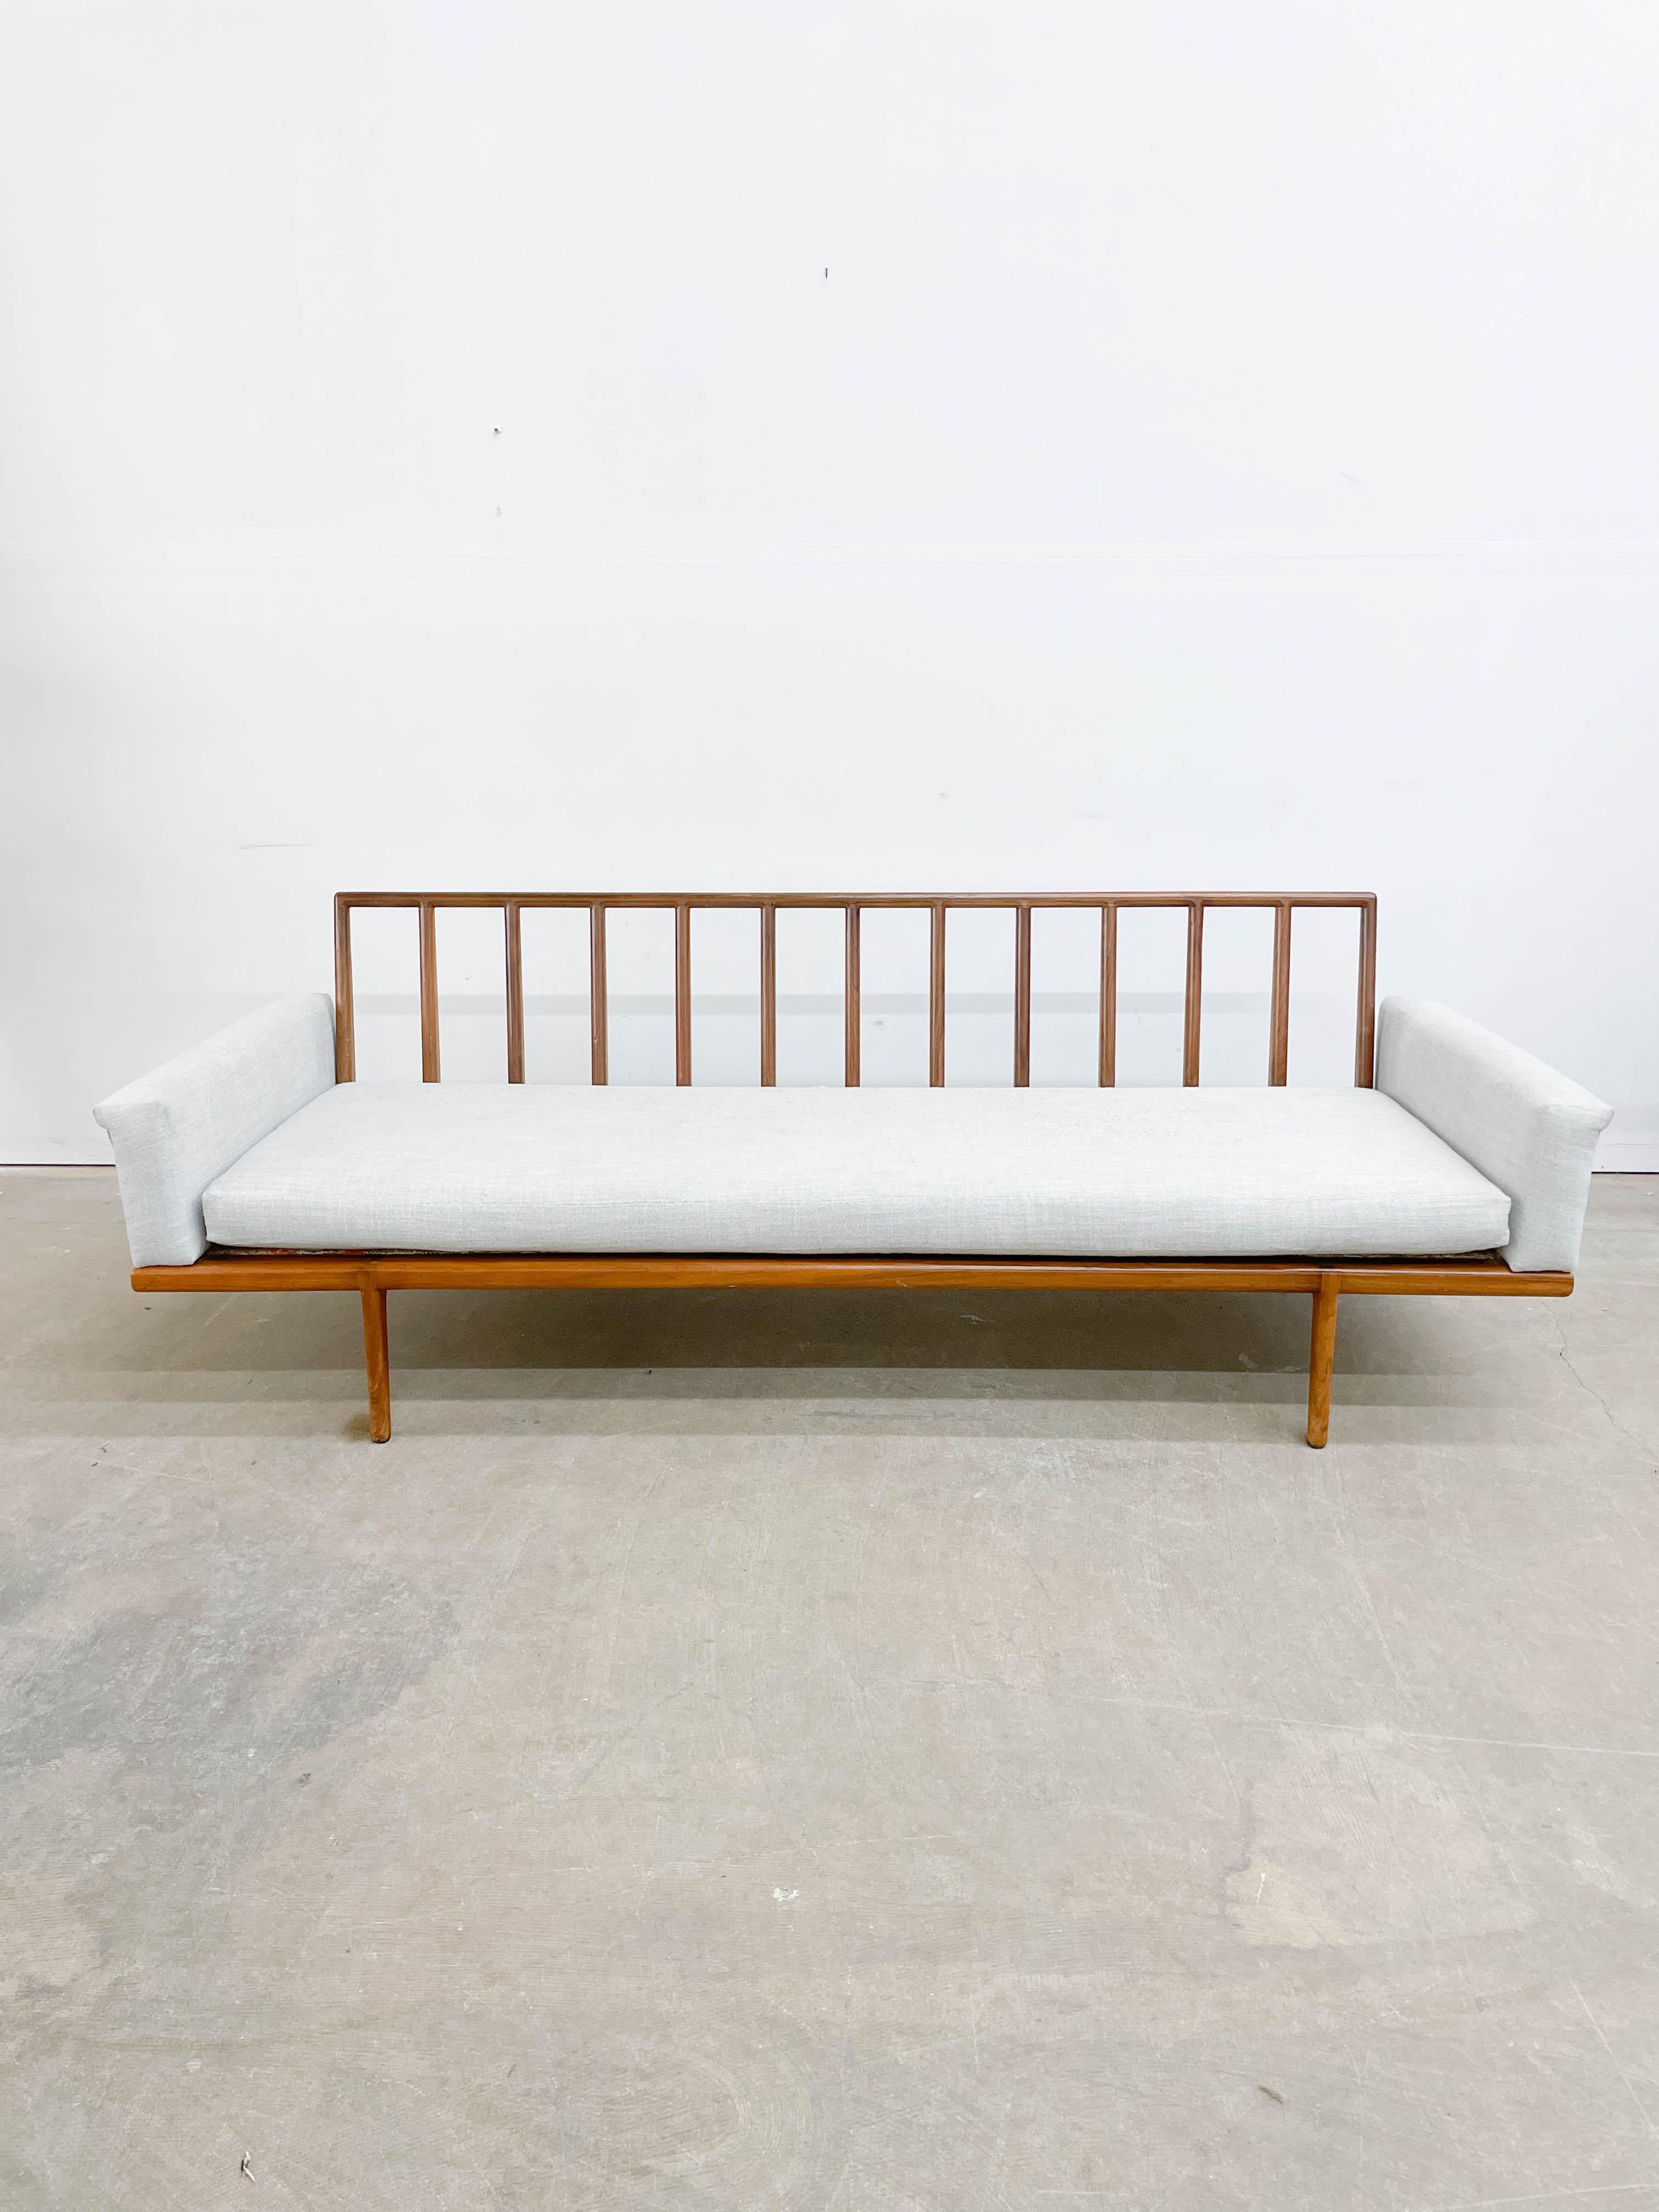 Admire this sleek vintage Mid-Century Modern sofa designed by Mel Smilow in the 1960s! Smilow designed this for his company Smilow-Thielle, a socially progressive furniture manufacturer and retailer with designs meant to be durable and stand the